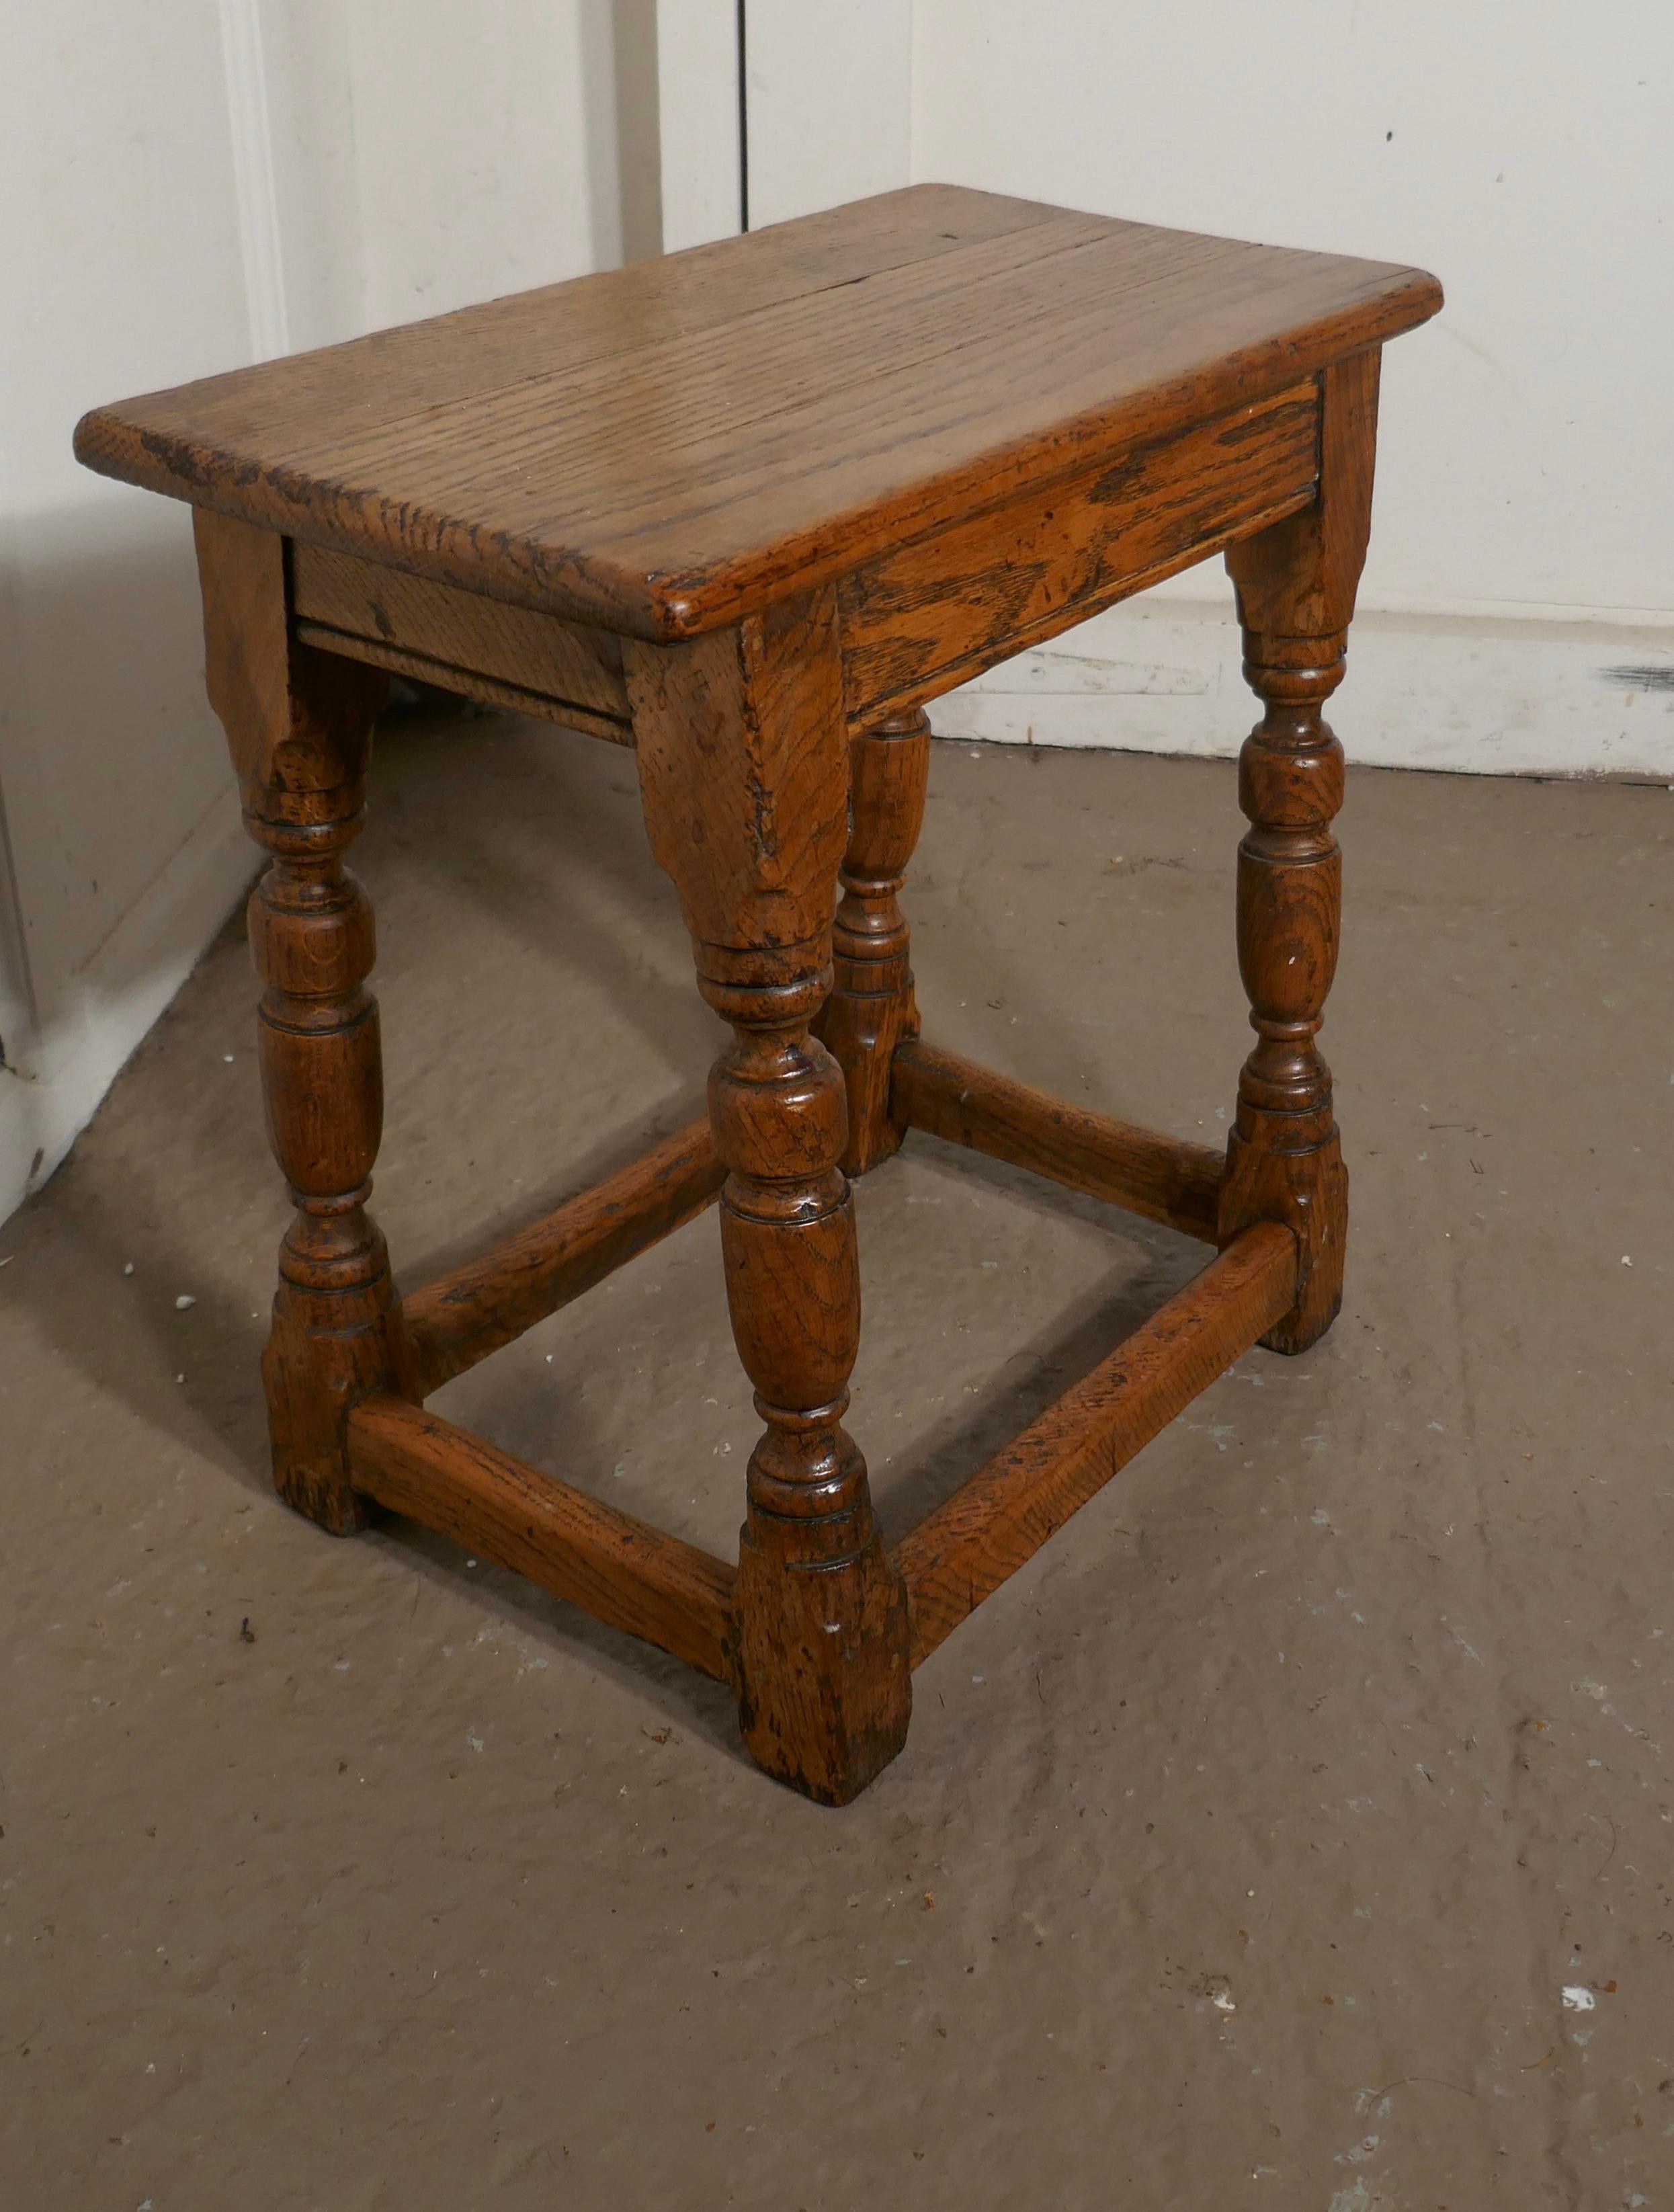 19th century golden oak joint stool

This a good oak Joined stool a good solid stool, it has a good natural color and a lovely patina, it makes a great occasional stool, or even a small side table
The stool is 18” high, 18” wide and 10”